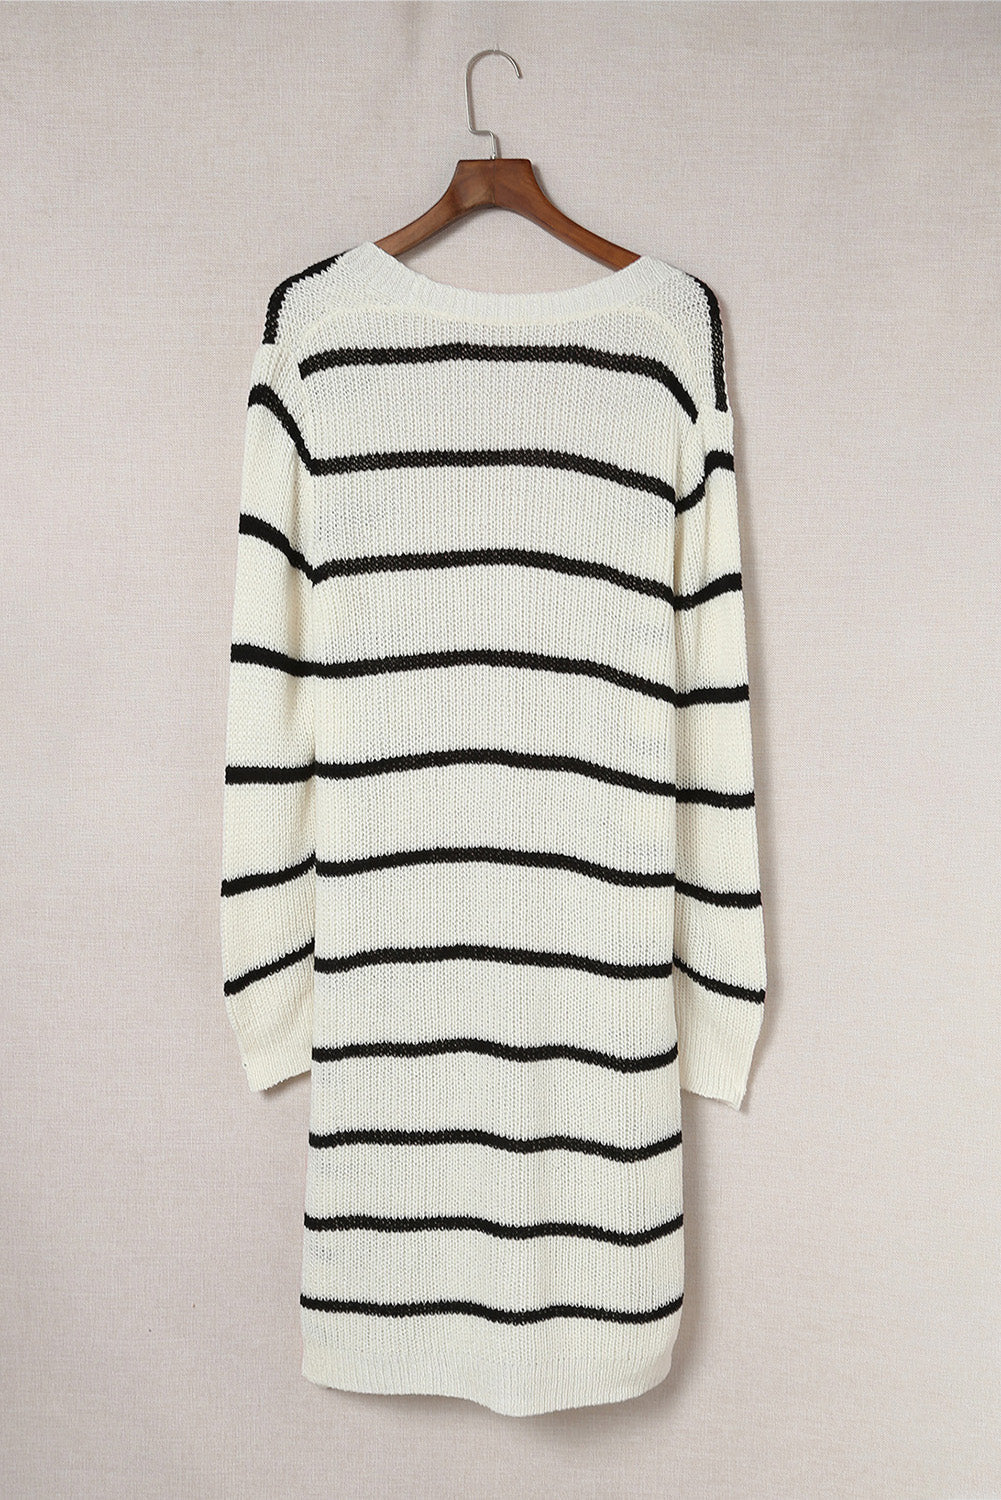 Striped Open Front Rib-Knit Duster Cardigan - Women’s Clothing & Accessories - Shirts & Tops - 11 - 2024